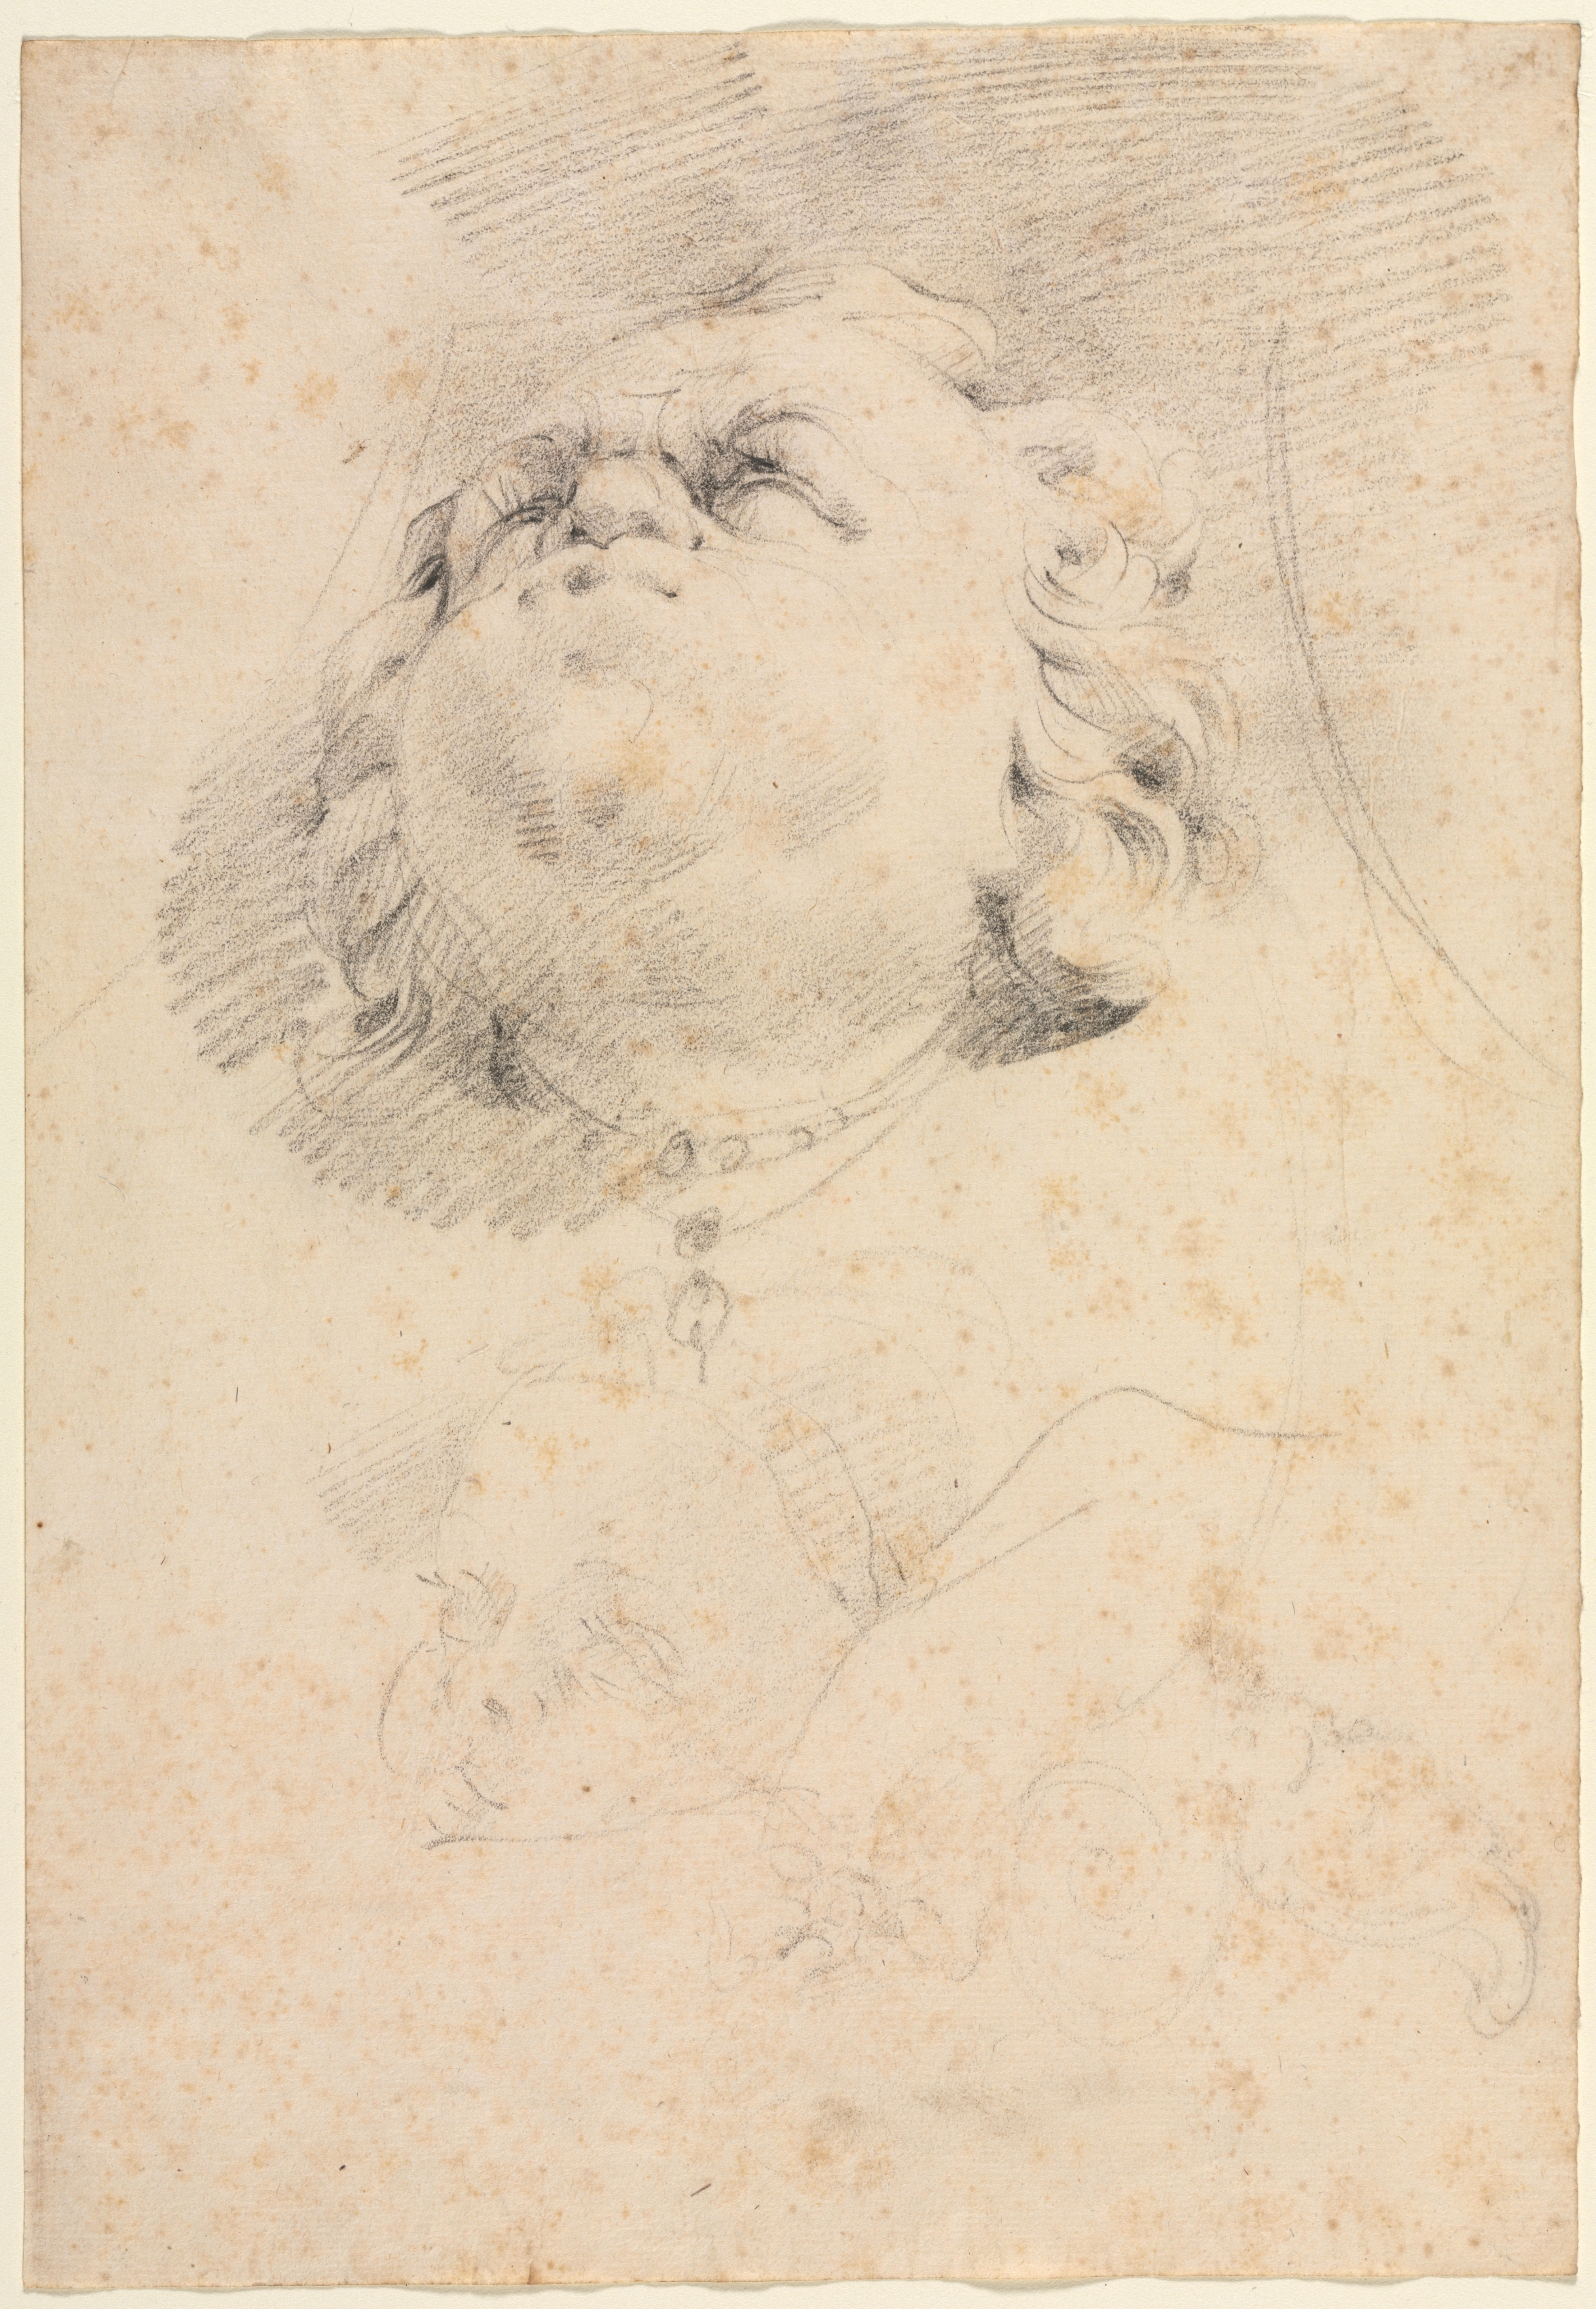 Sketch of a Heads after Giambologna's Neptune Fountain